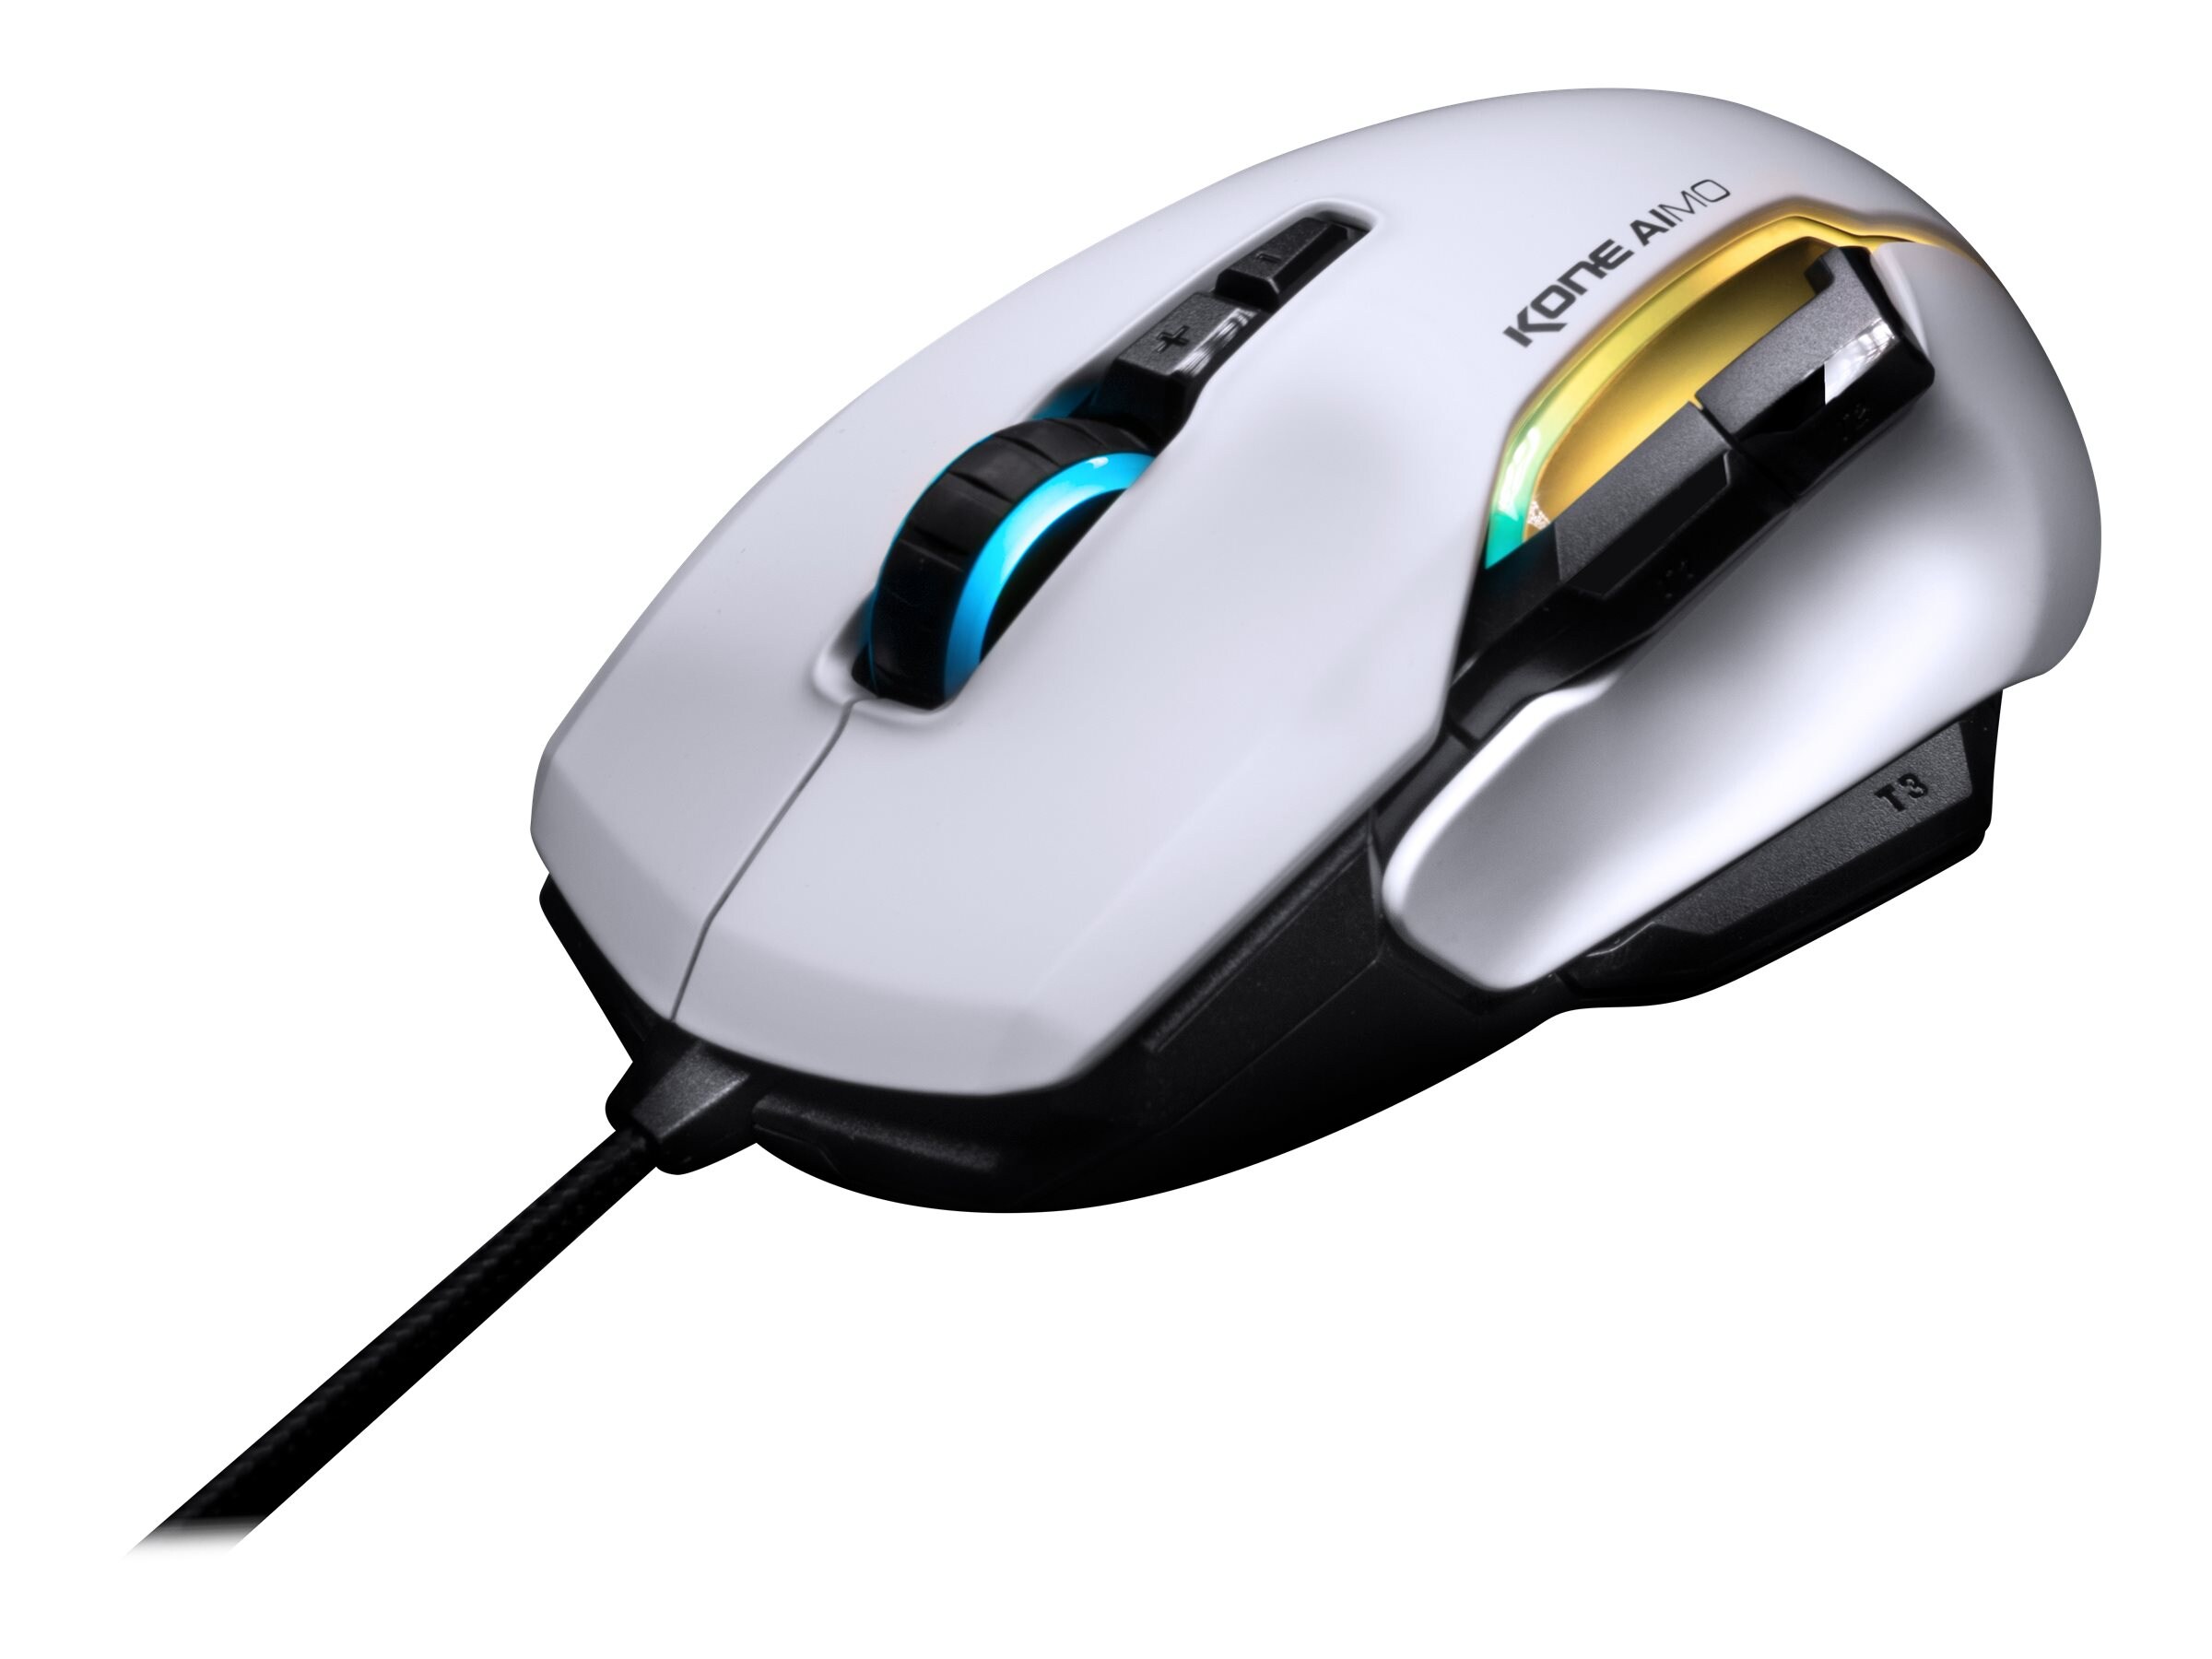 Maus AIMO weiss remastered Kone Cyberport ++ ROCCAT Gaming